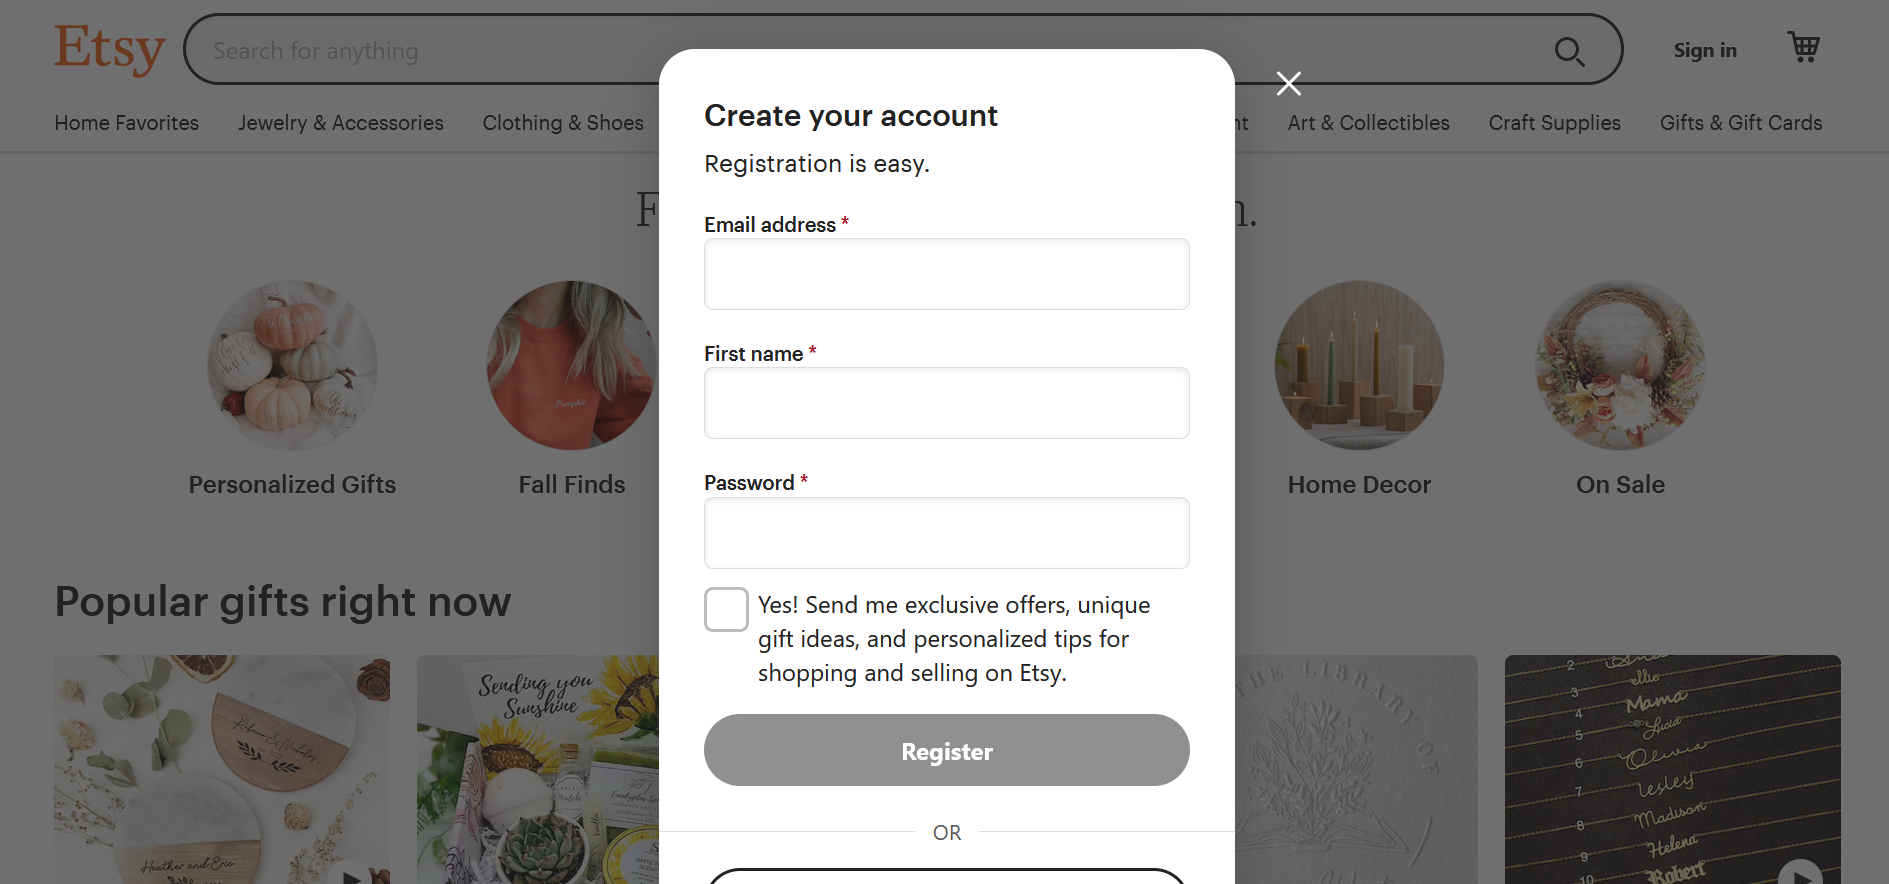 Screenshot of the account creation window on Etsy